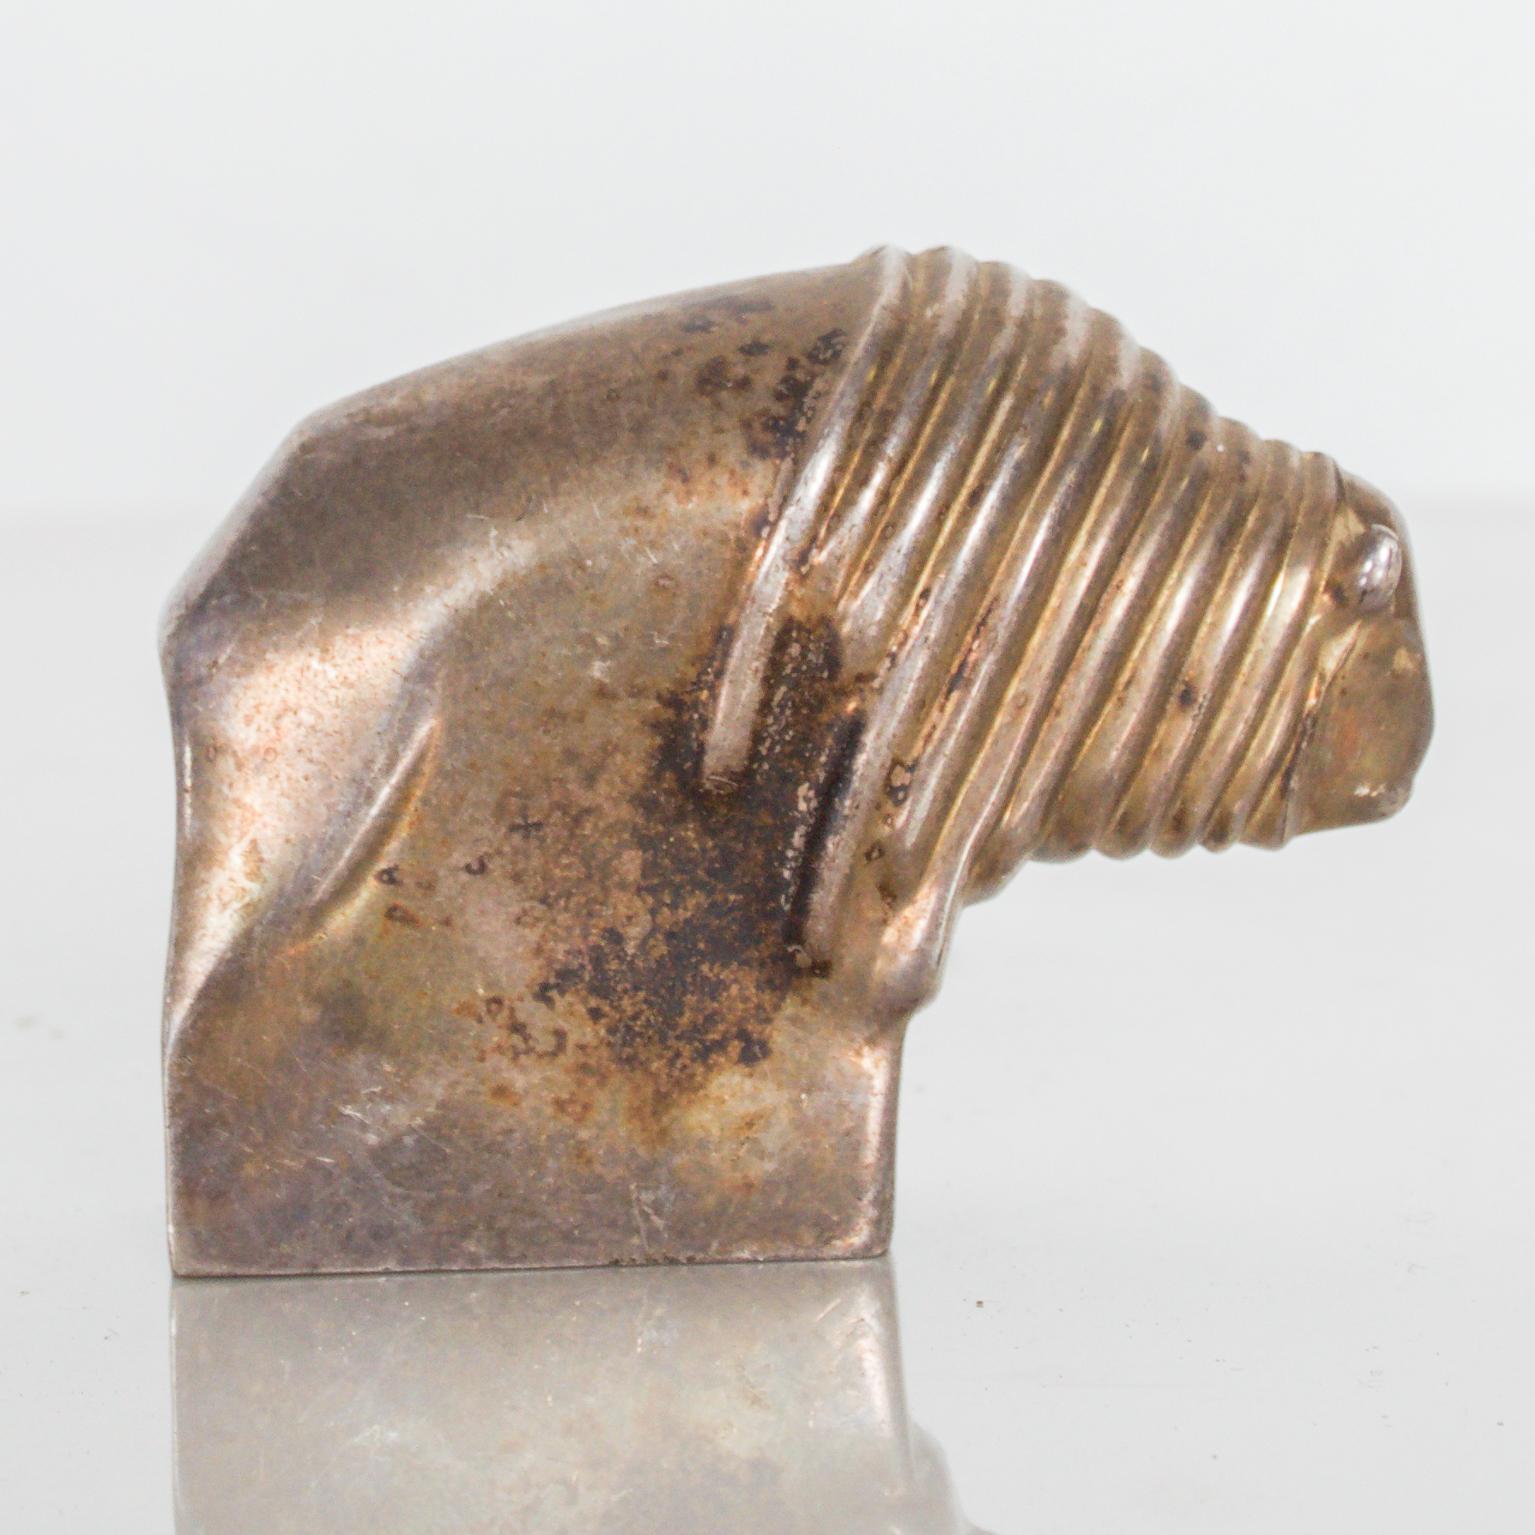 We features: Too cute Dansk Bison paperweight in silver plate Danish Modern DANSK Designs a vintage Mid-Century Modern piece.
Japanese silver-plated Bison paperweight by Dansk International Designs. Marked on underside.

Dimensions: 2 1/4